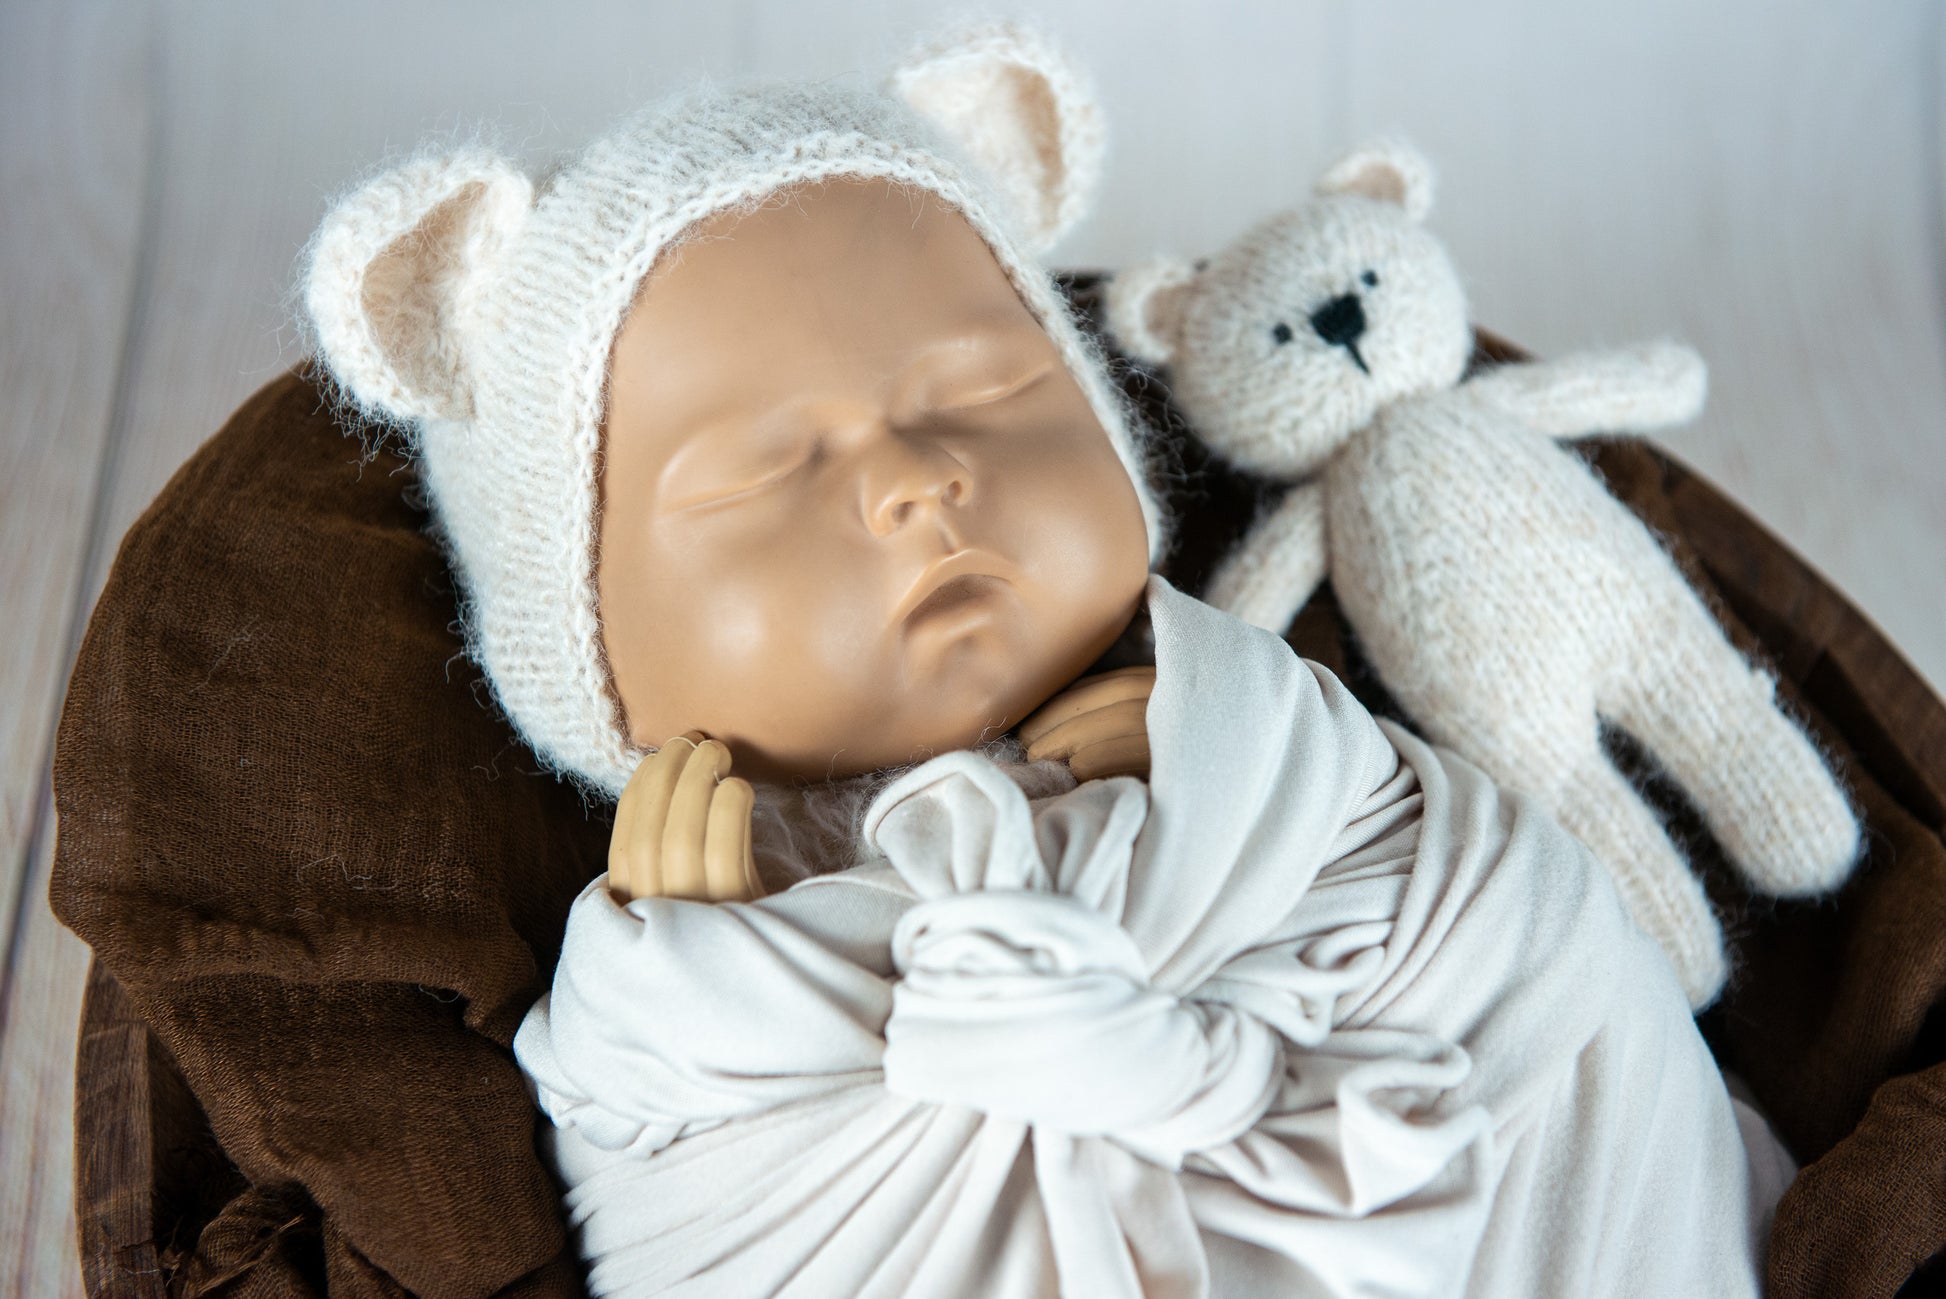 Knit teddy bear and matching hat beside cream swaddle; newborn photography prop.